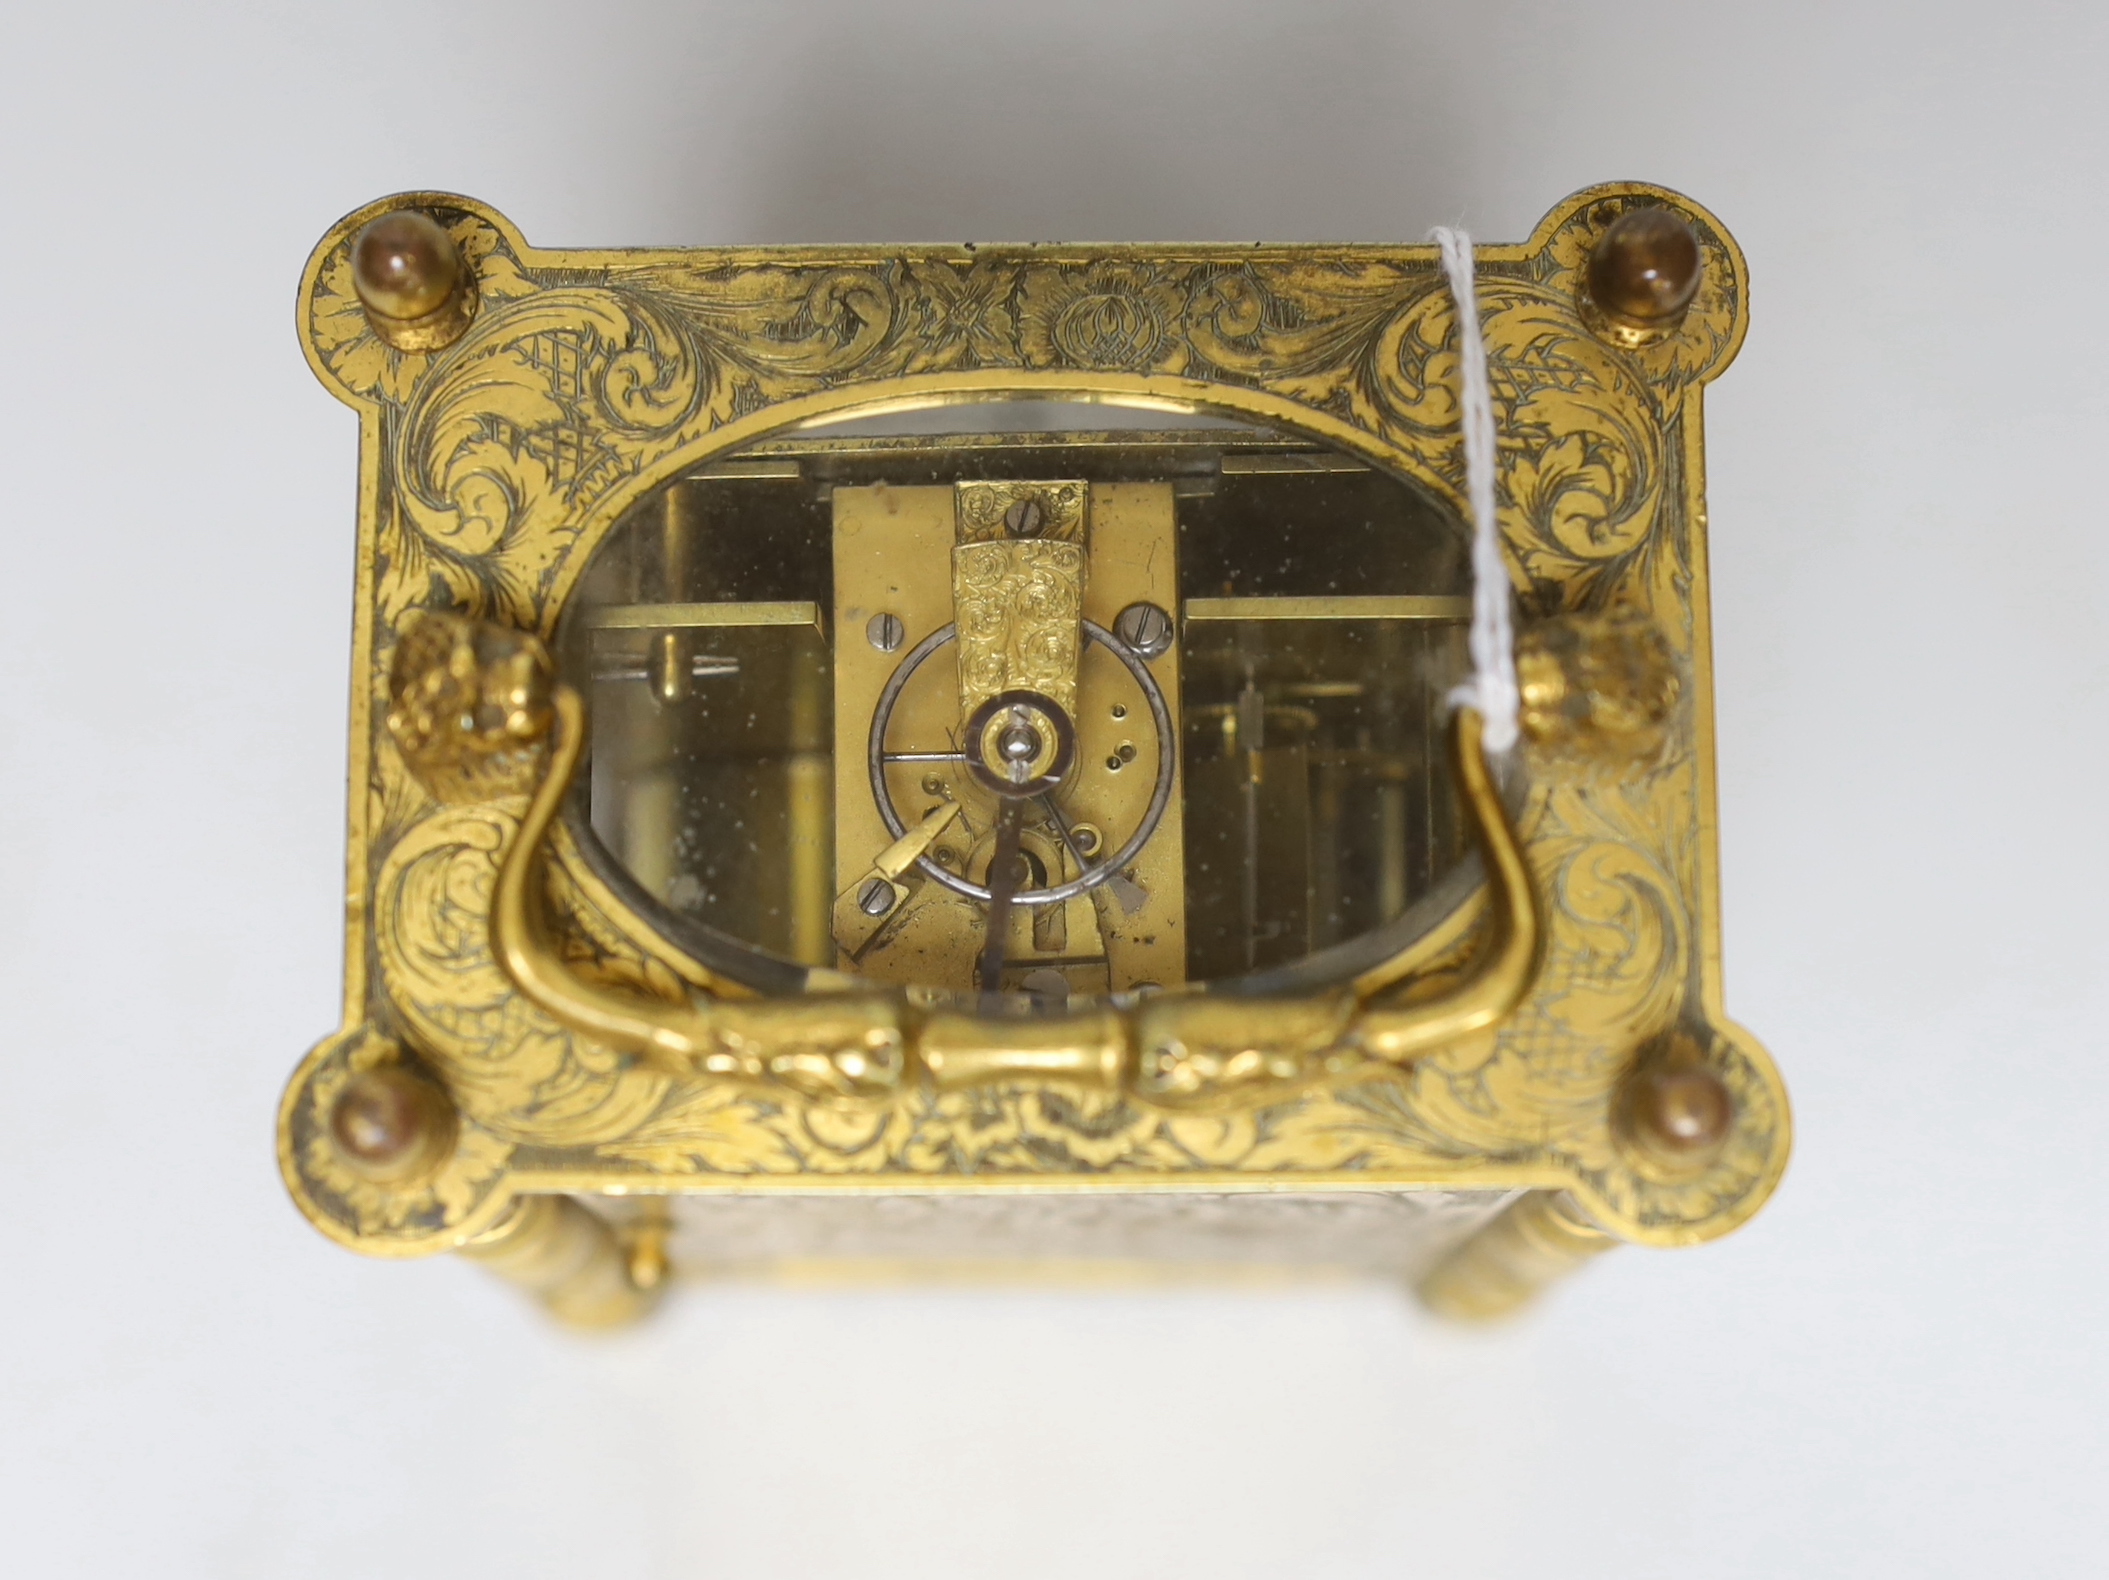 A mid 19th century French engraved gilt brass carriage clock, with tooled leather case, 16cm high - Image 5 of 6